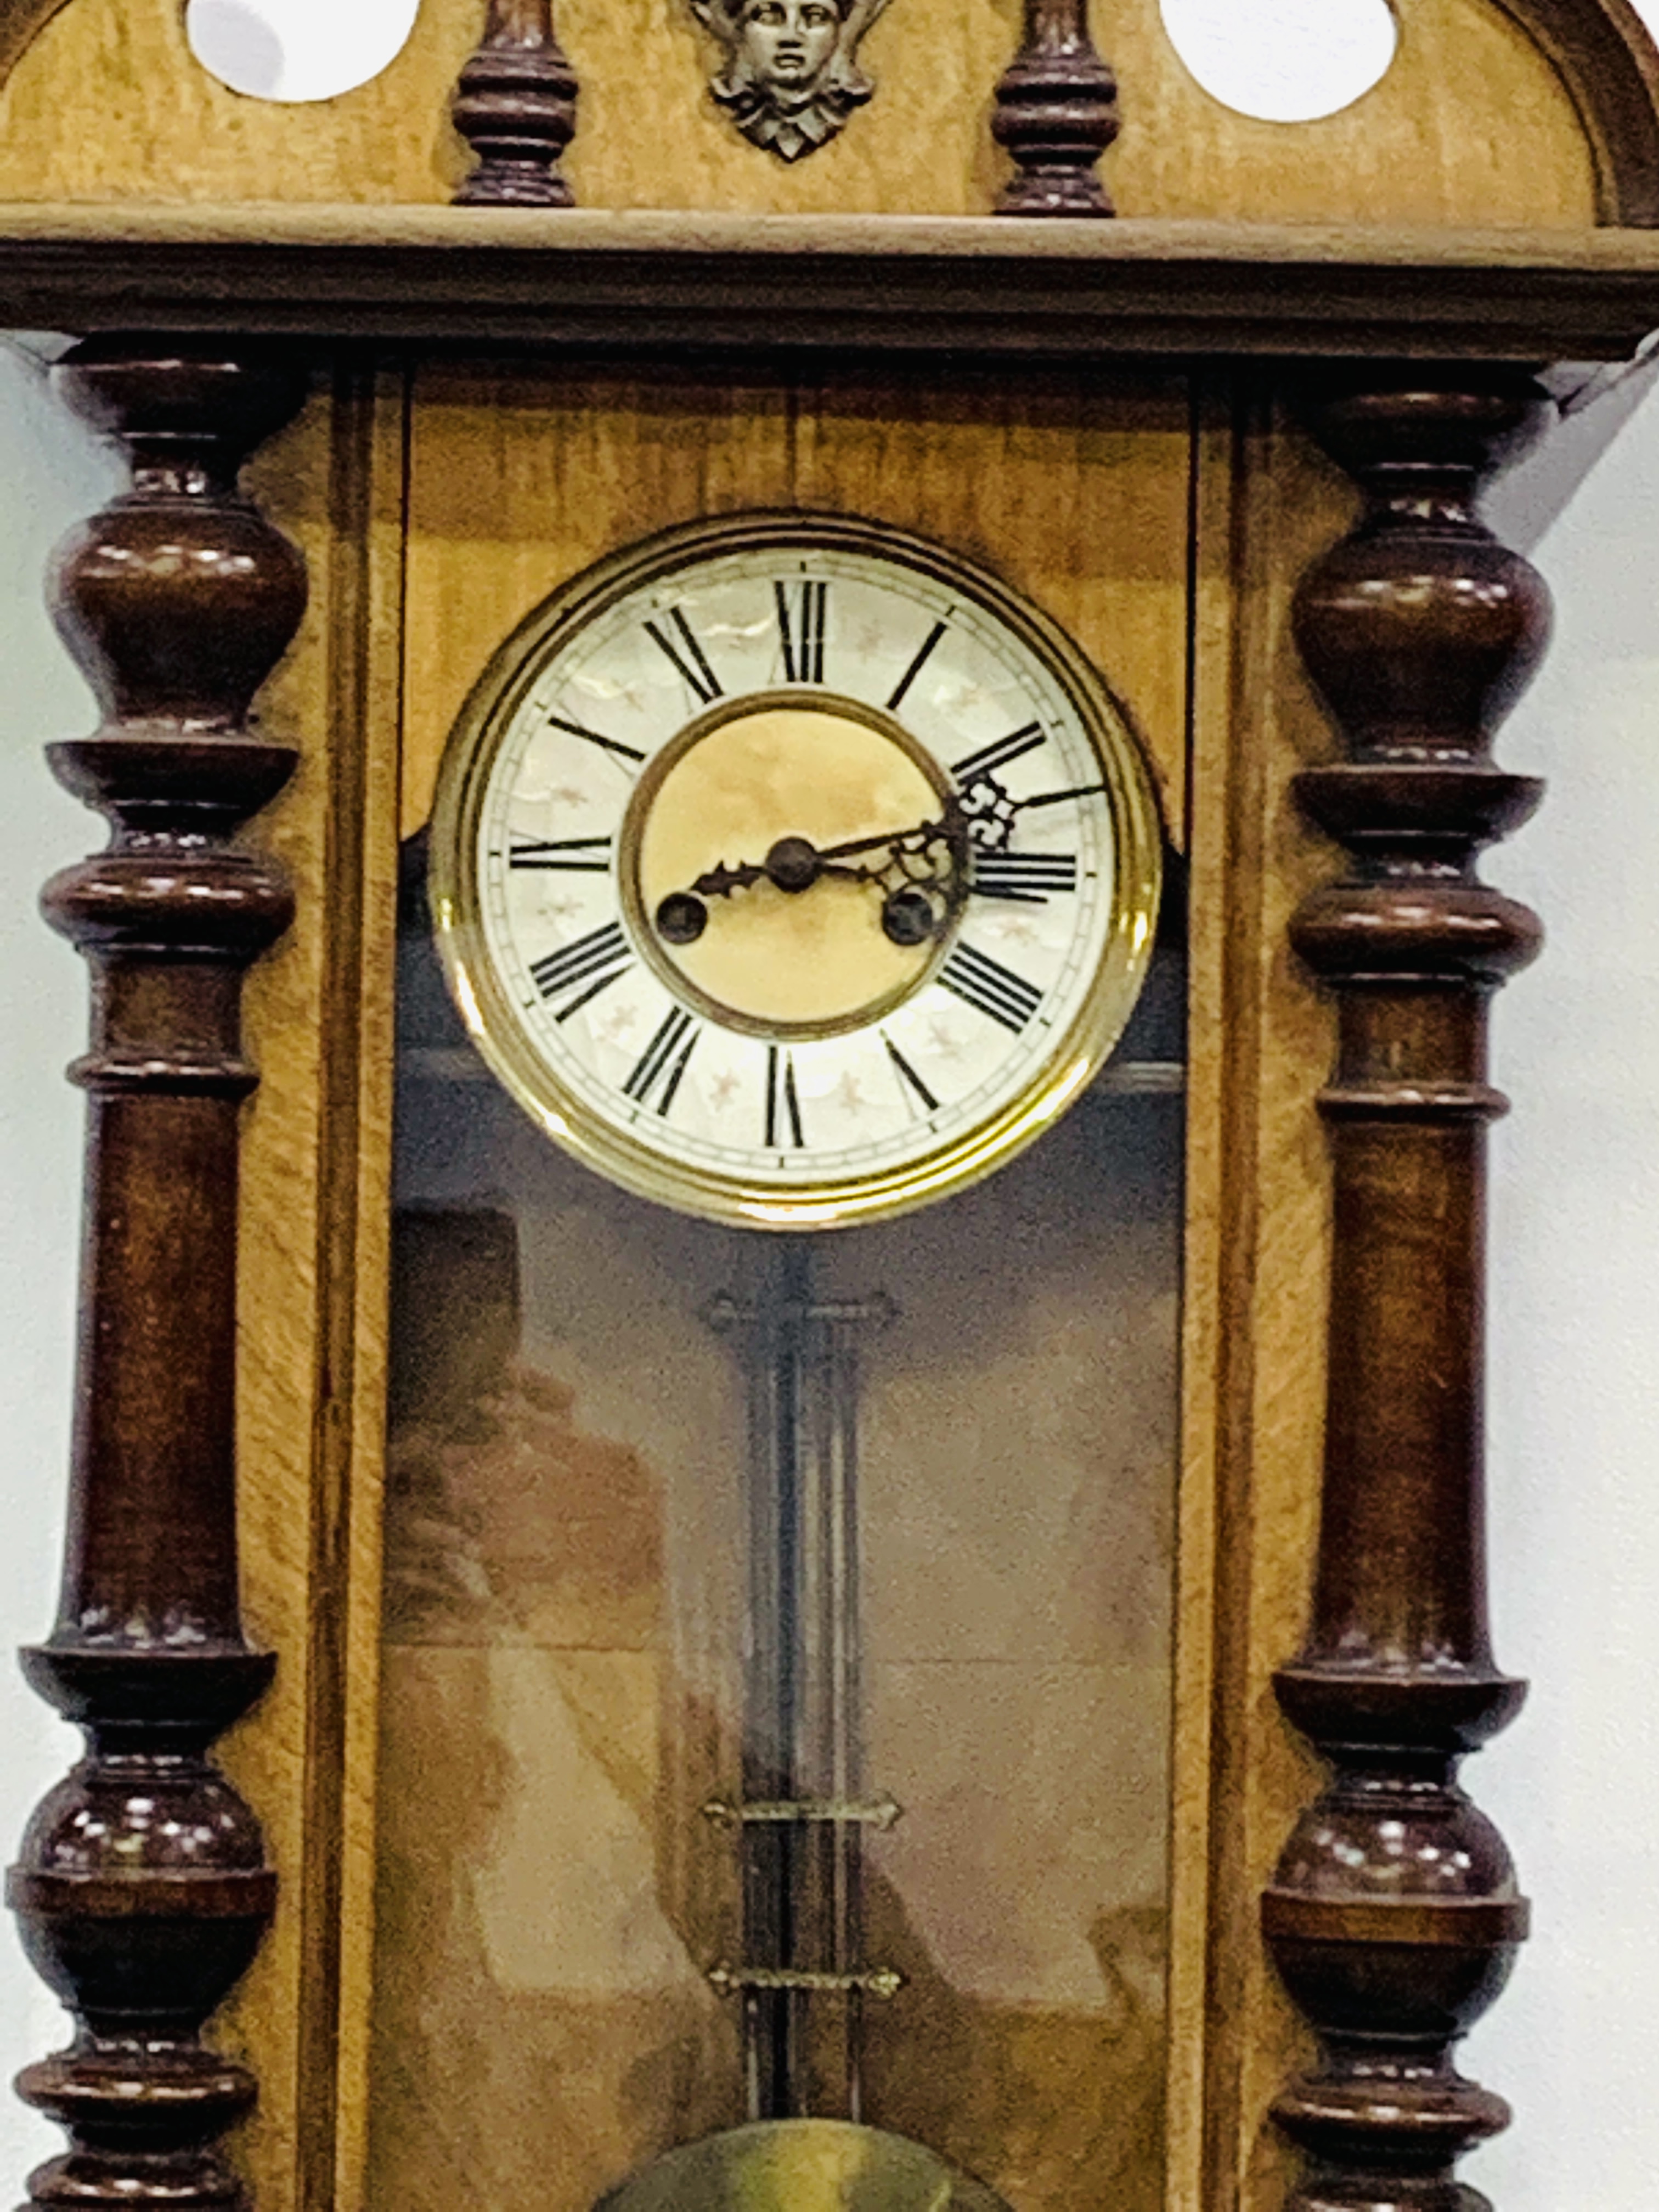 Viennese wall clock - Image 2 of 5